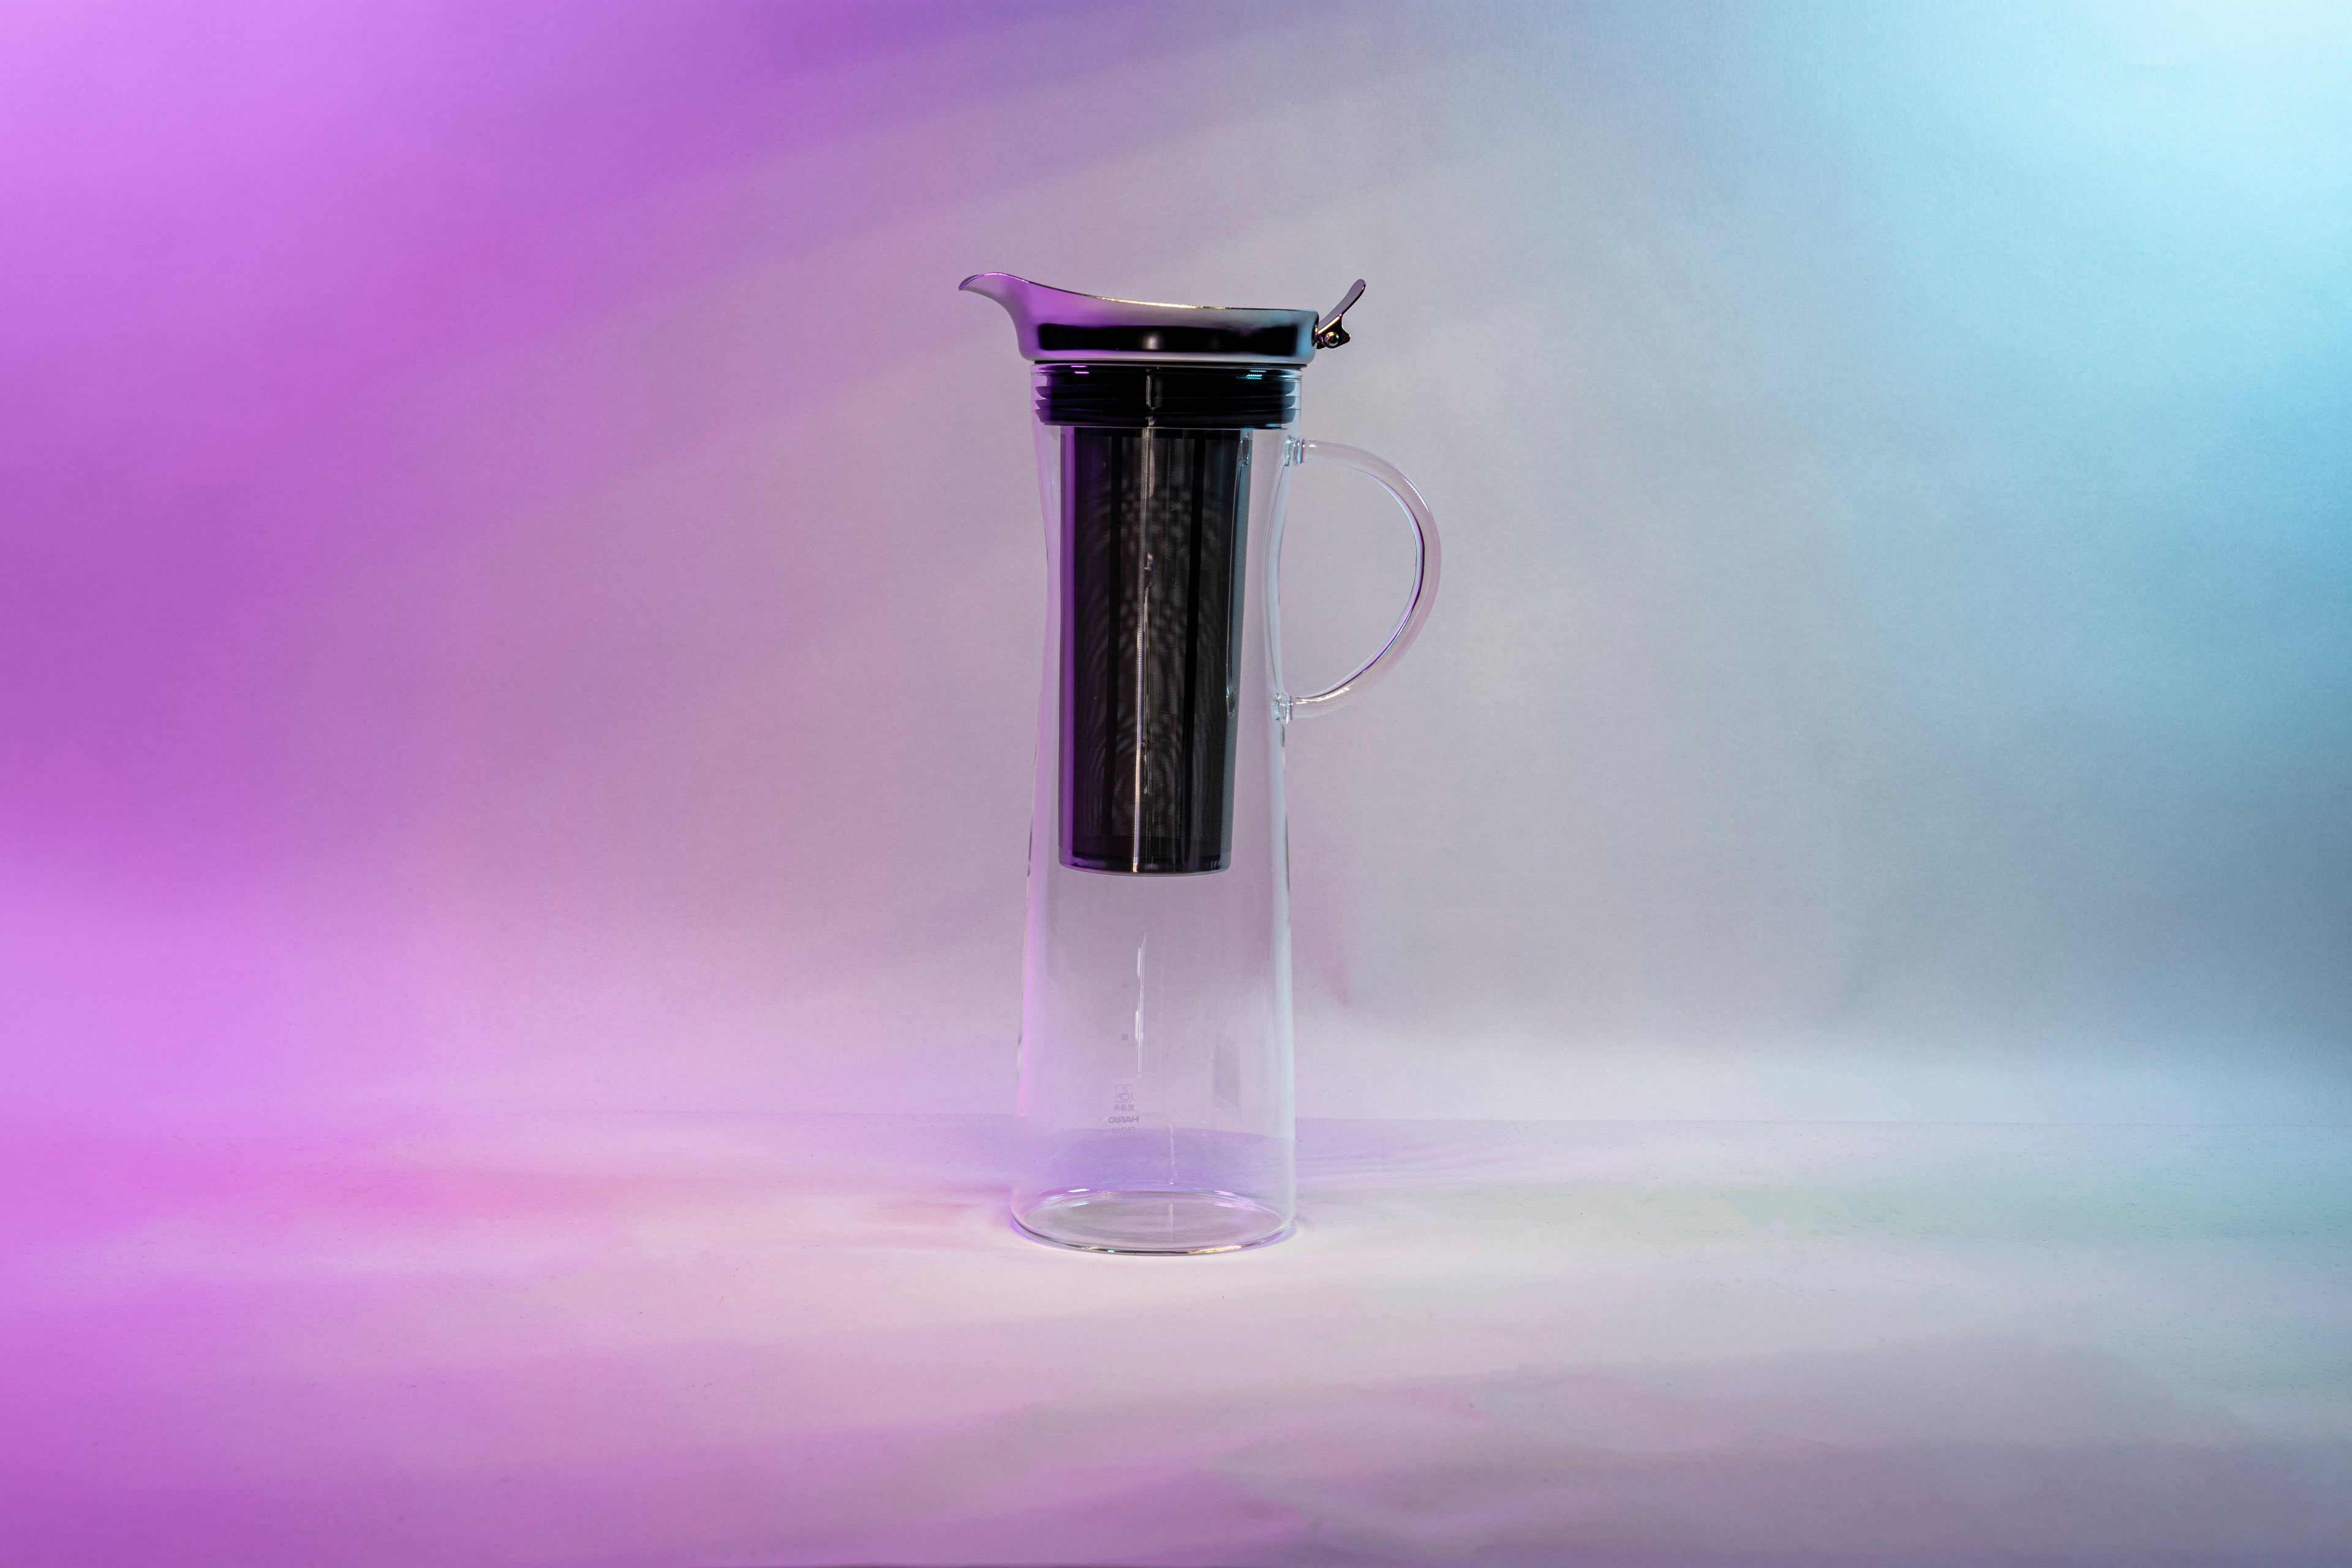 Tall, slim glass coffee pitcher with all glass full handle, stainless steel filter basket, metal lid with flared spout, and black silicone rubber seal against a purple, white, and blue background.